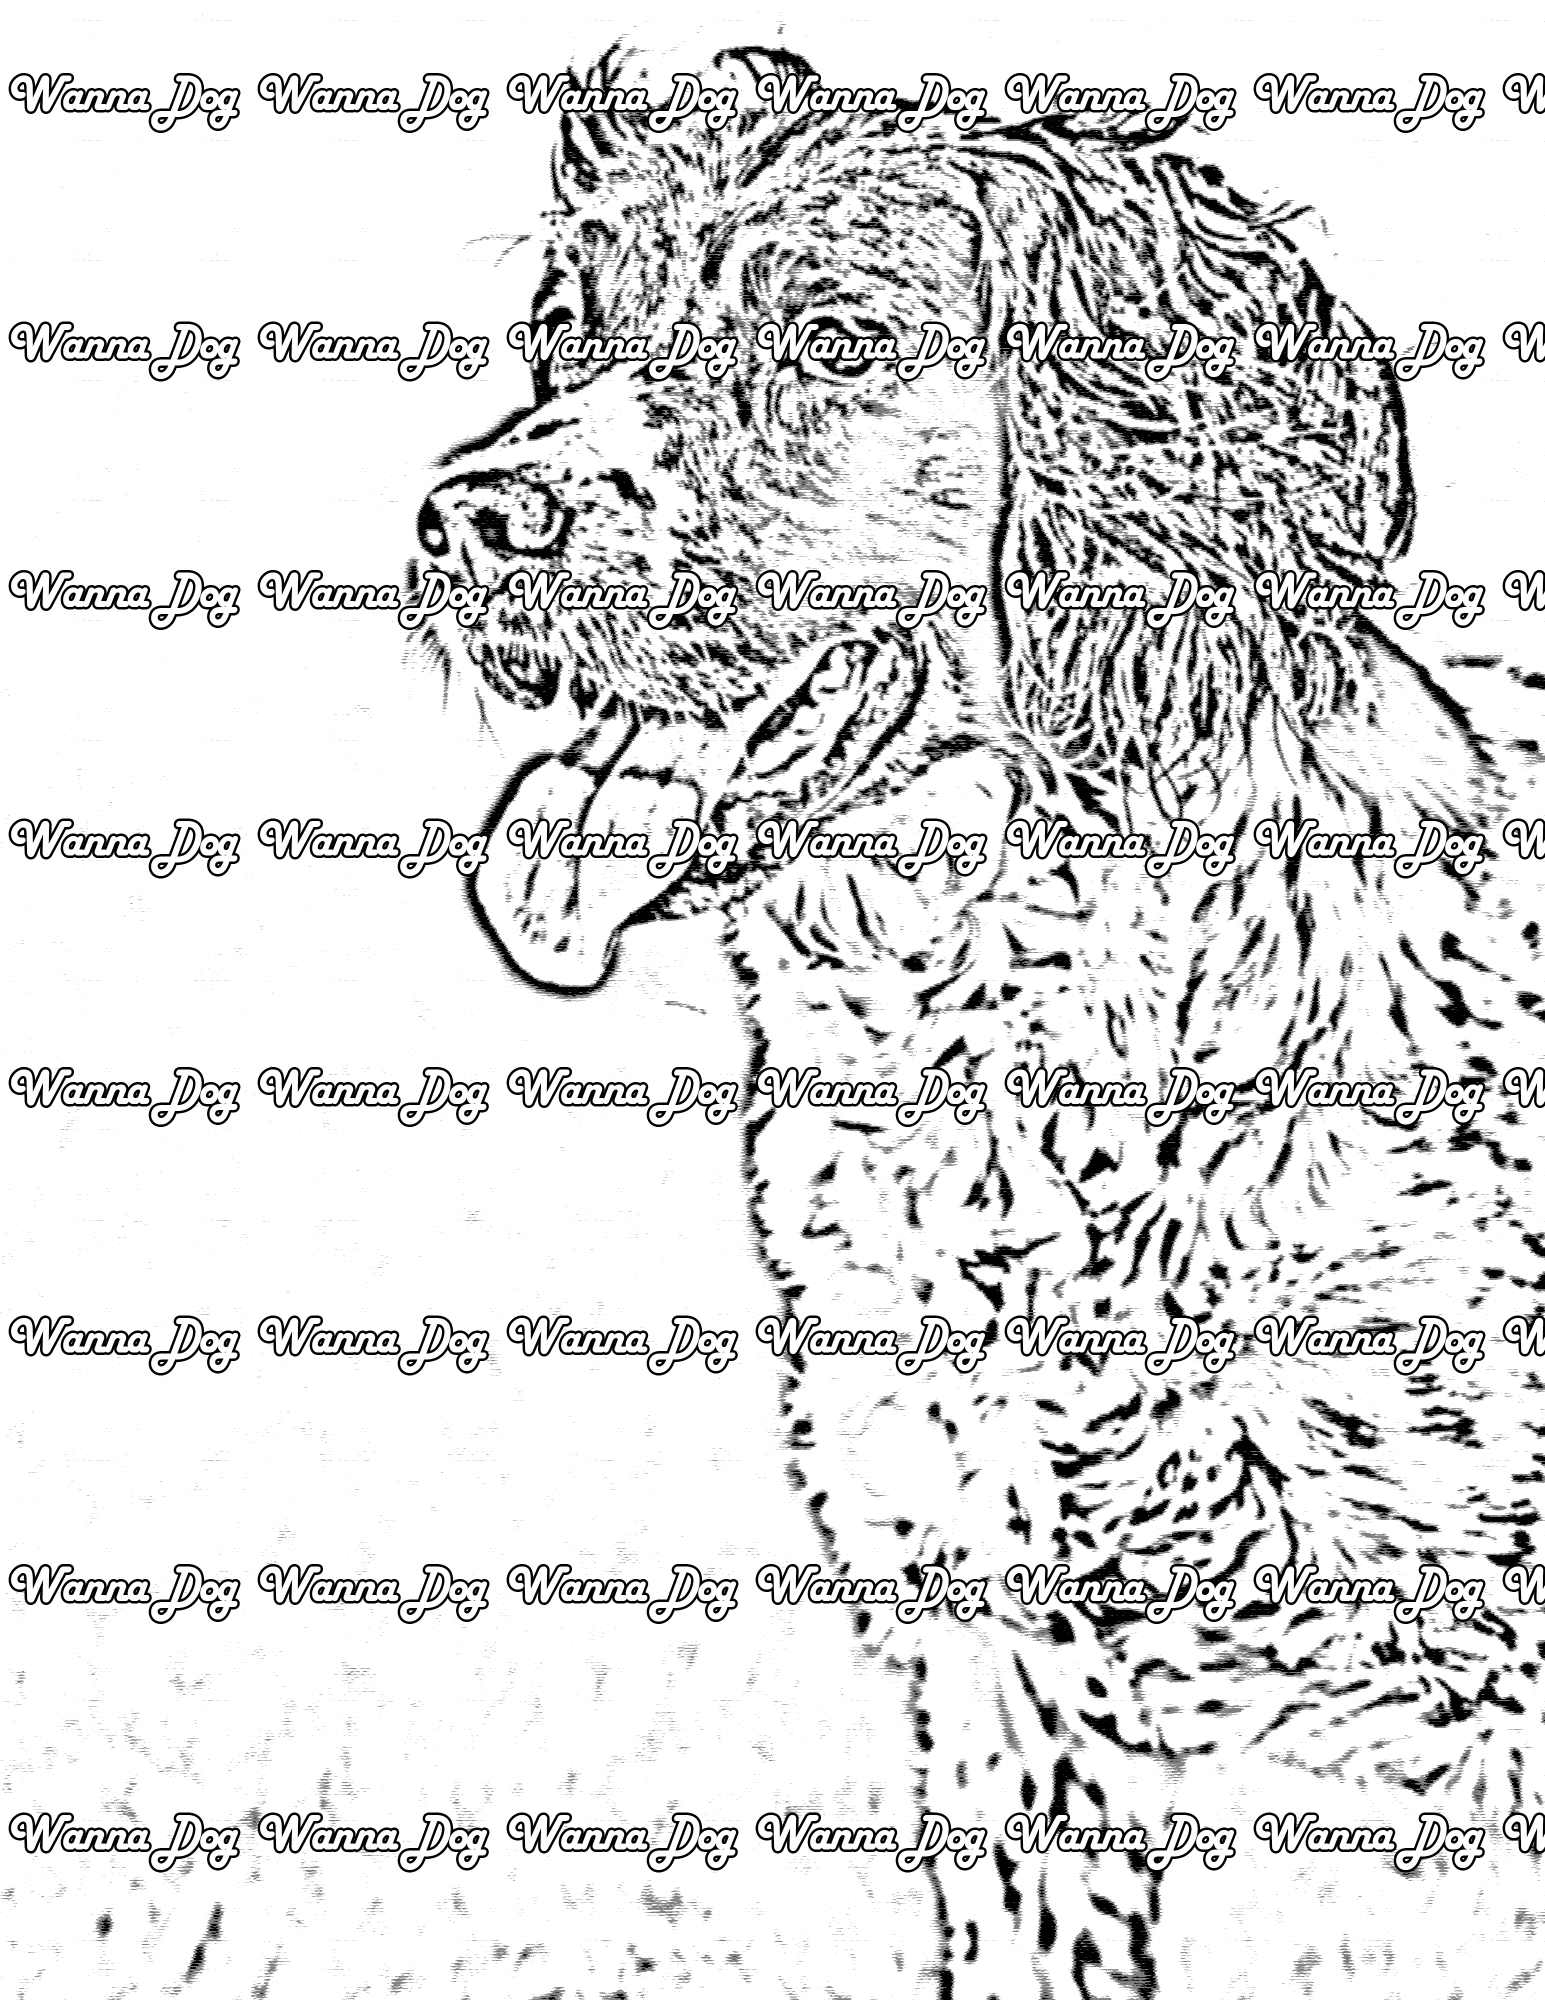 English Springer Spaniel Coloring Page of a English Springer Spaniel with their tongue out